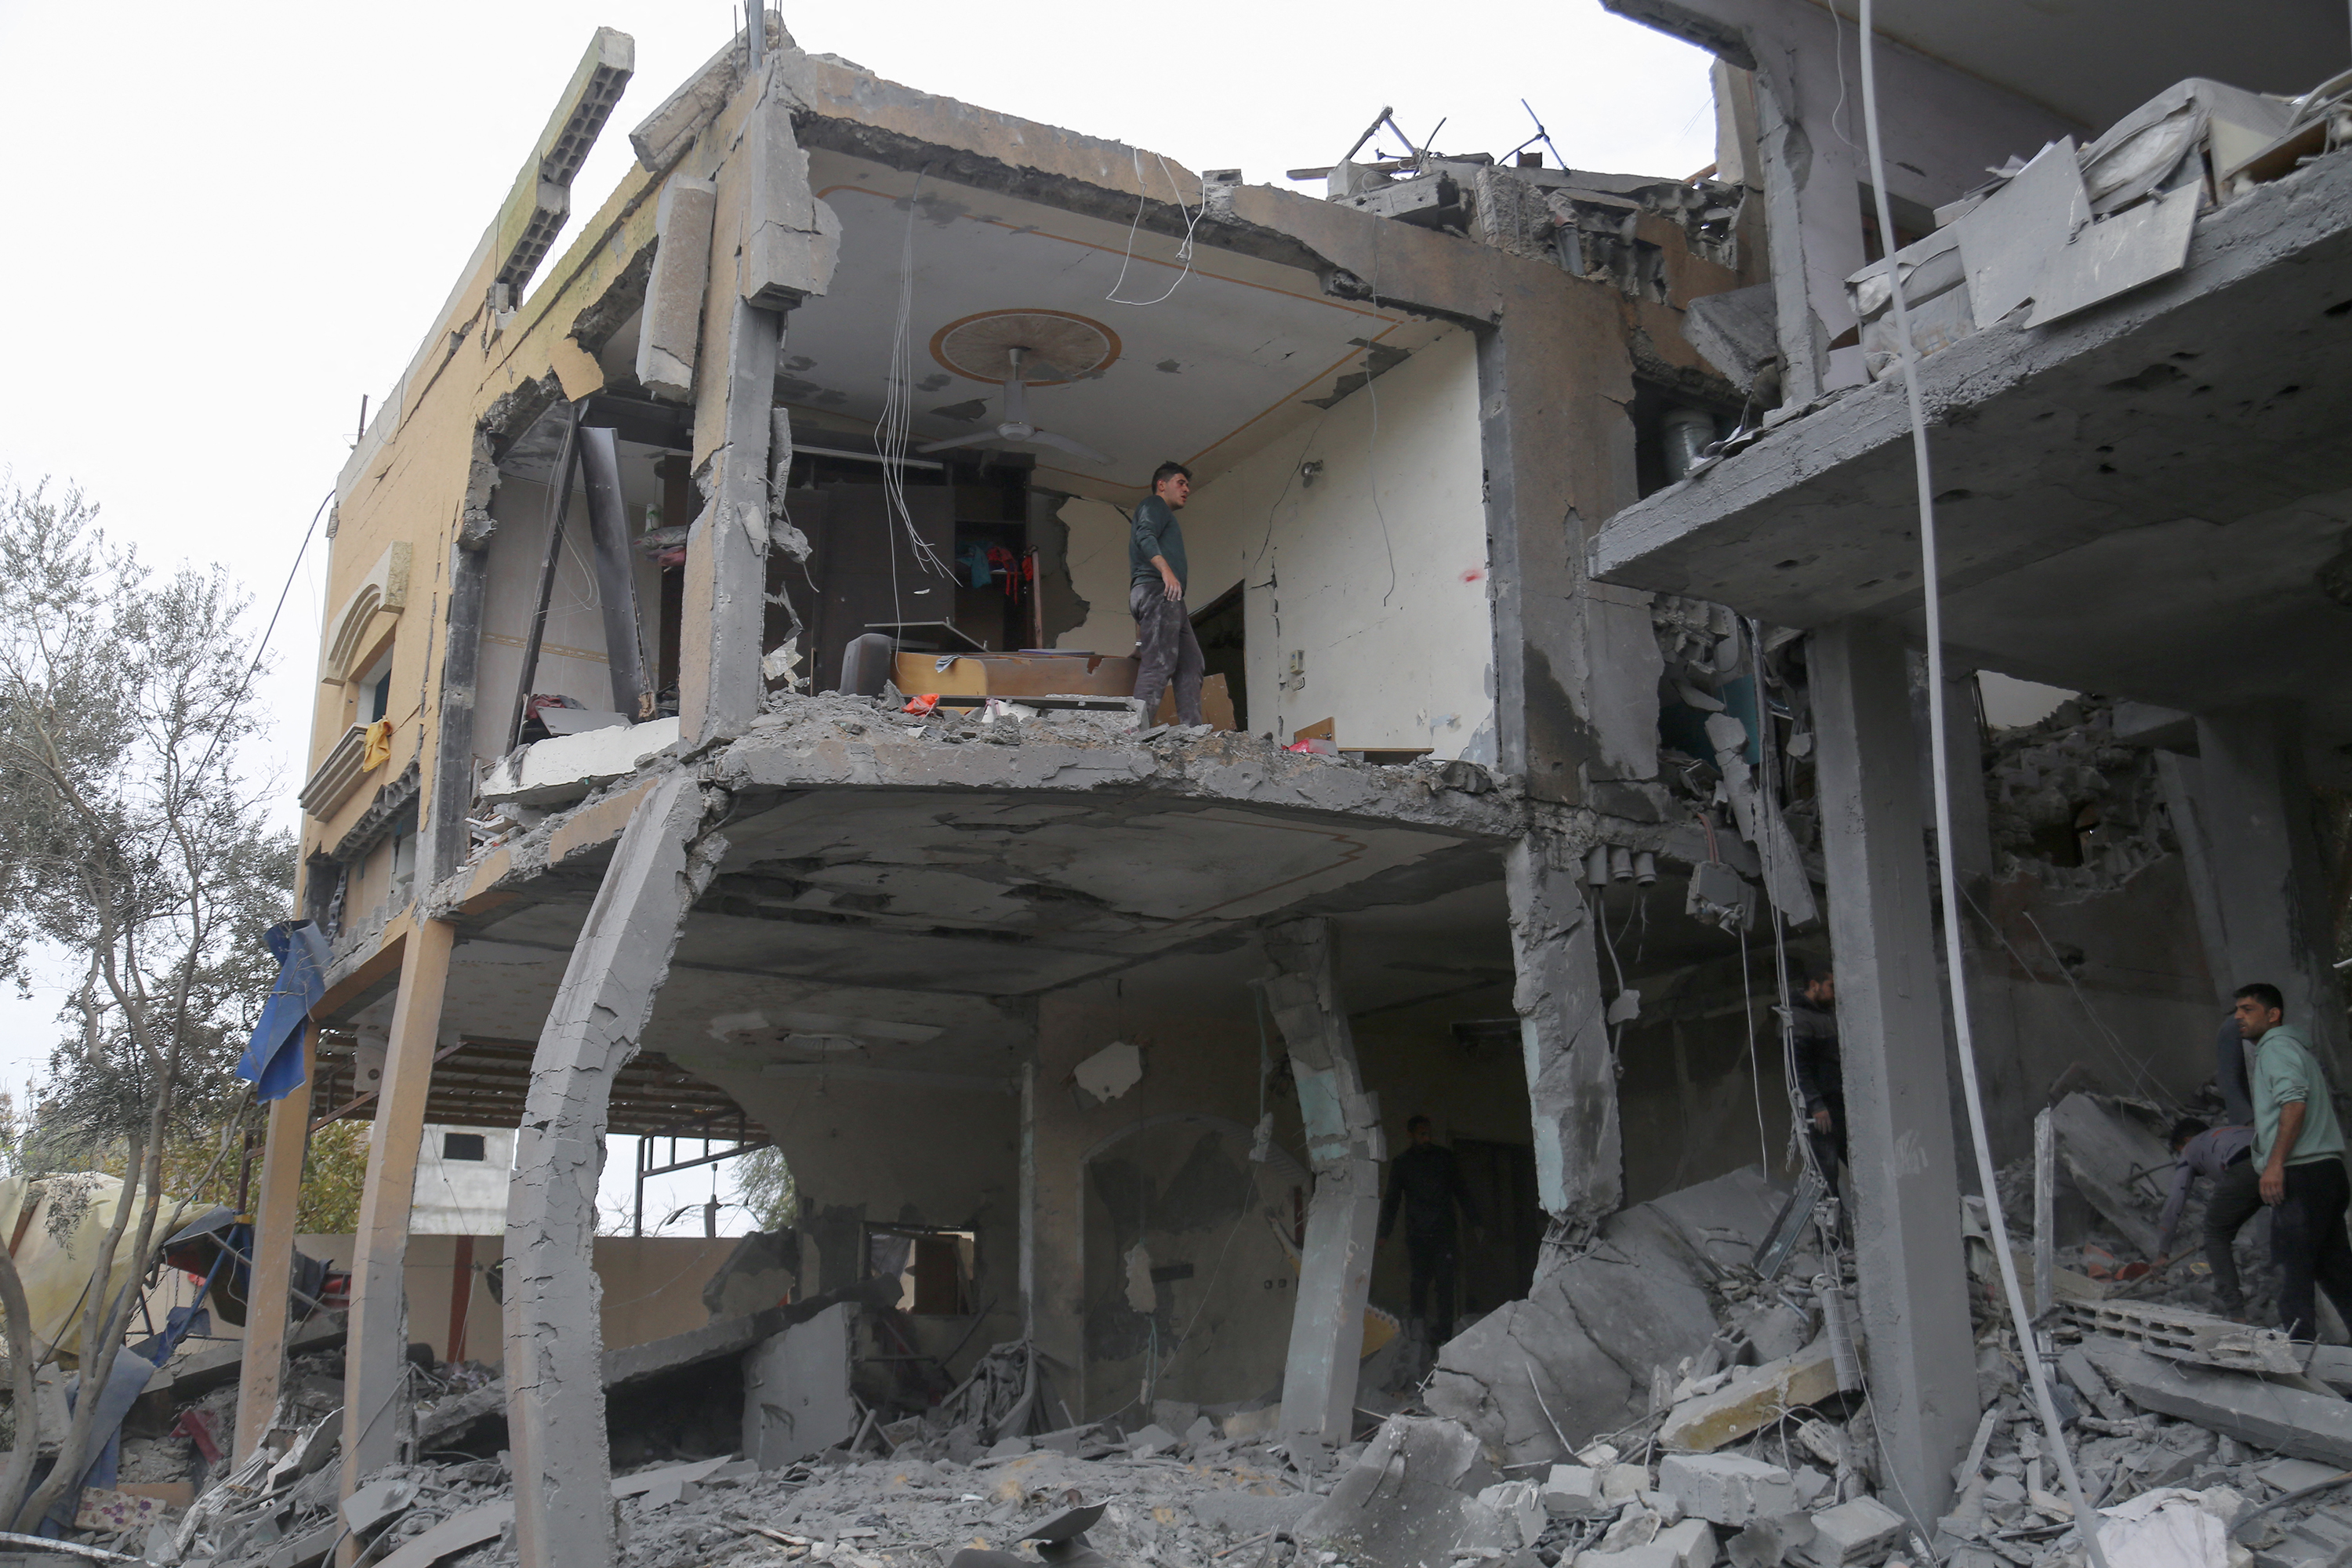 Palestinians search the rubble of a family home following Israeli bombardment west of the Nuseirat refugee camp in the central Gaza on March 16.